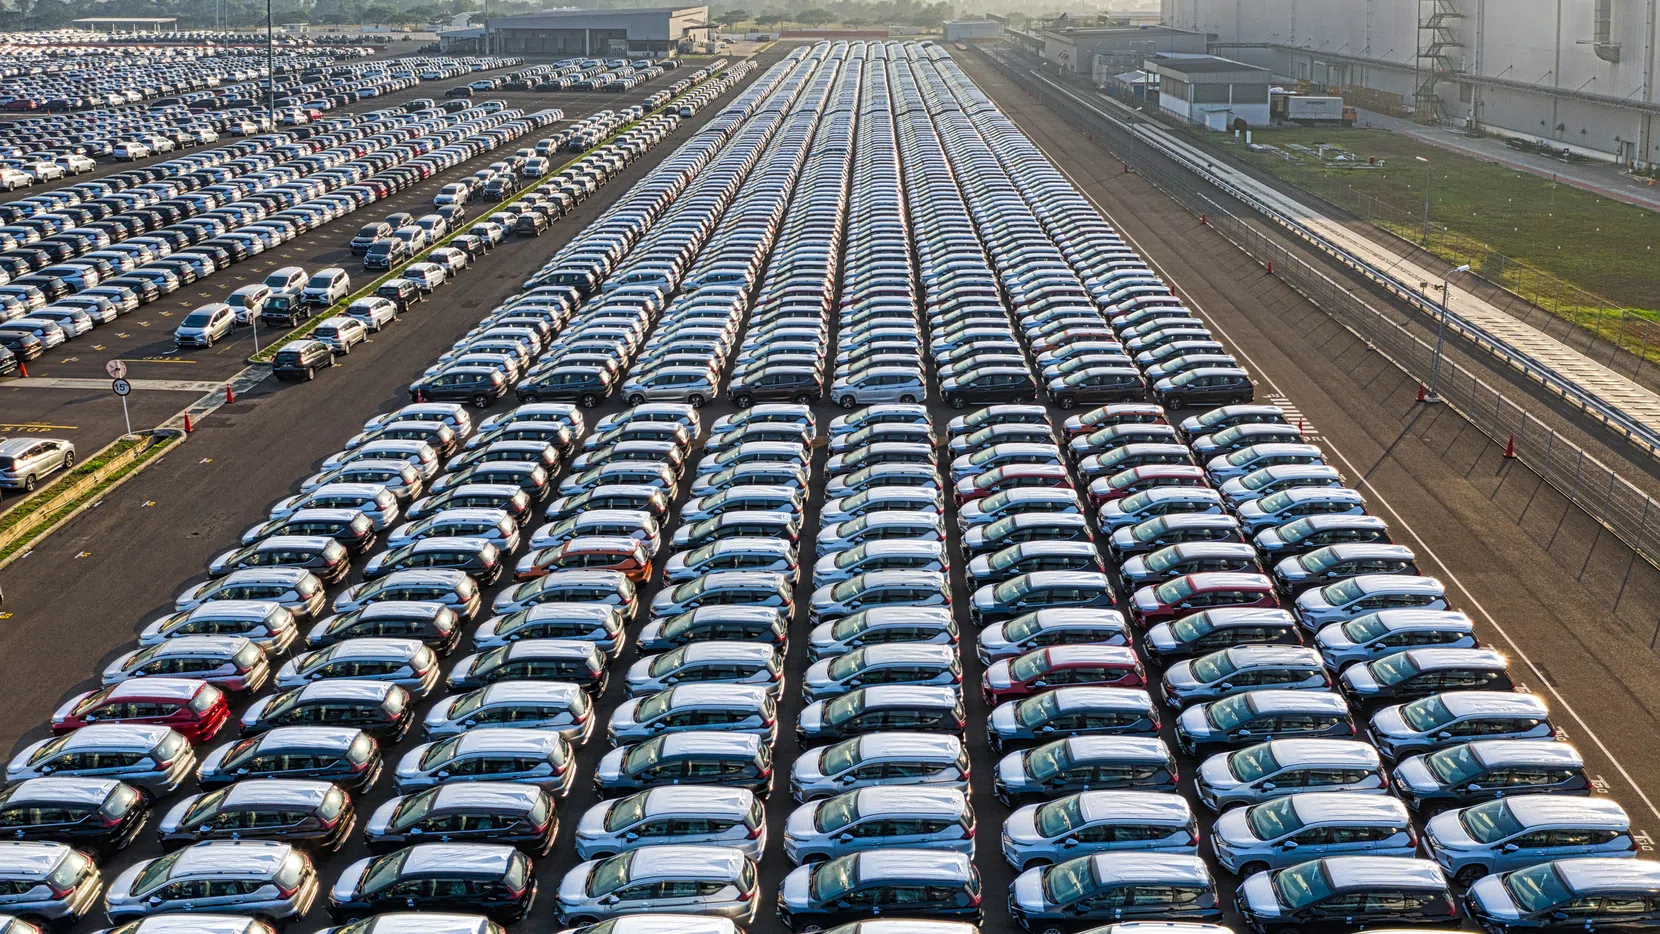 Rows of cars